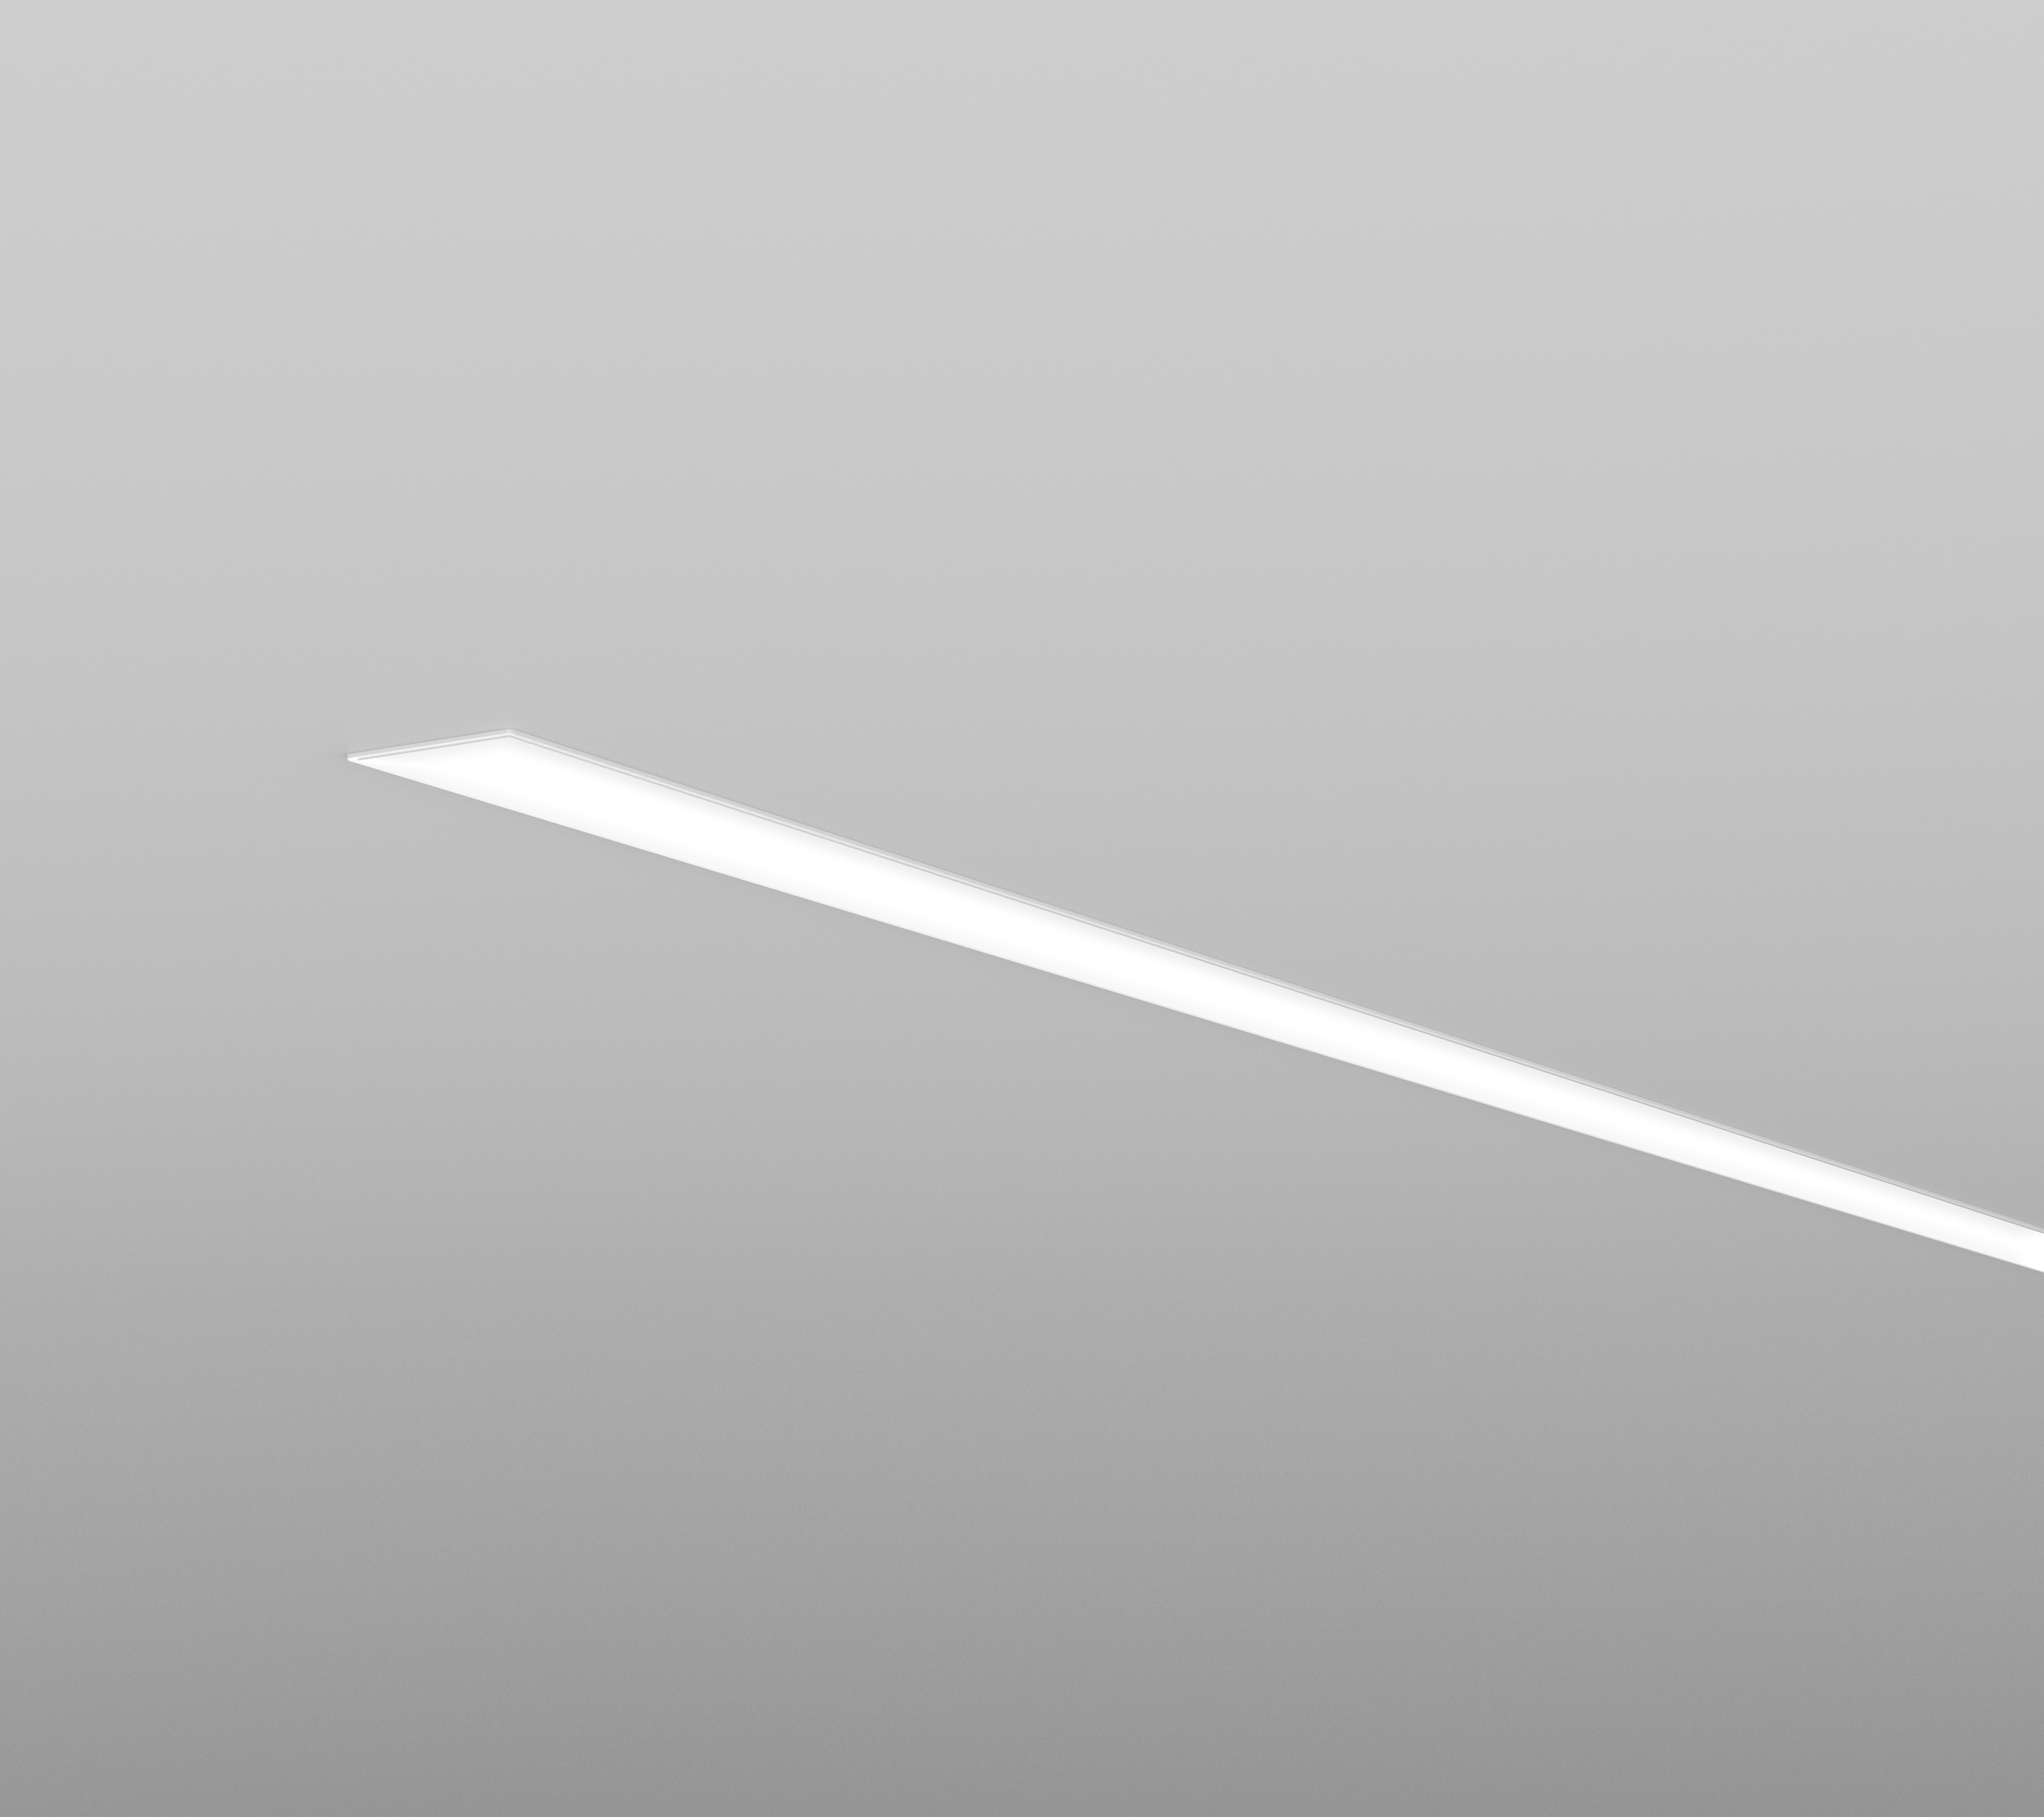 Slot 1 Recessed Linear Lighting With, Recessed Linear Lighting Revit